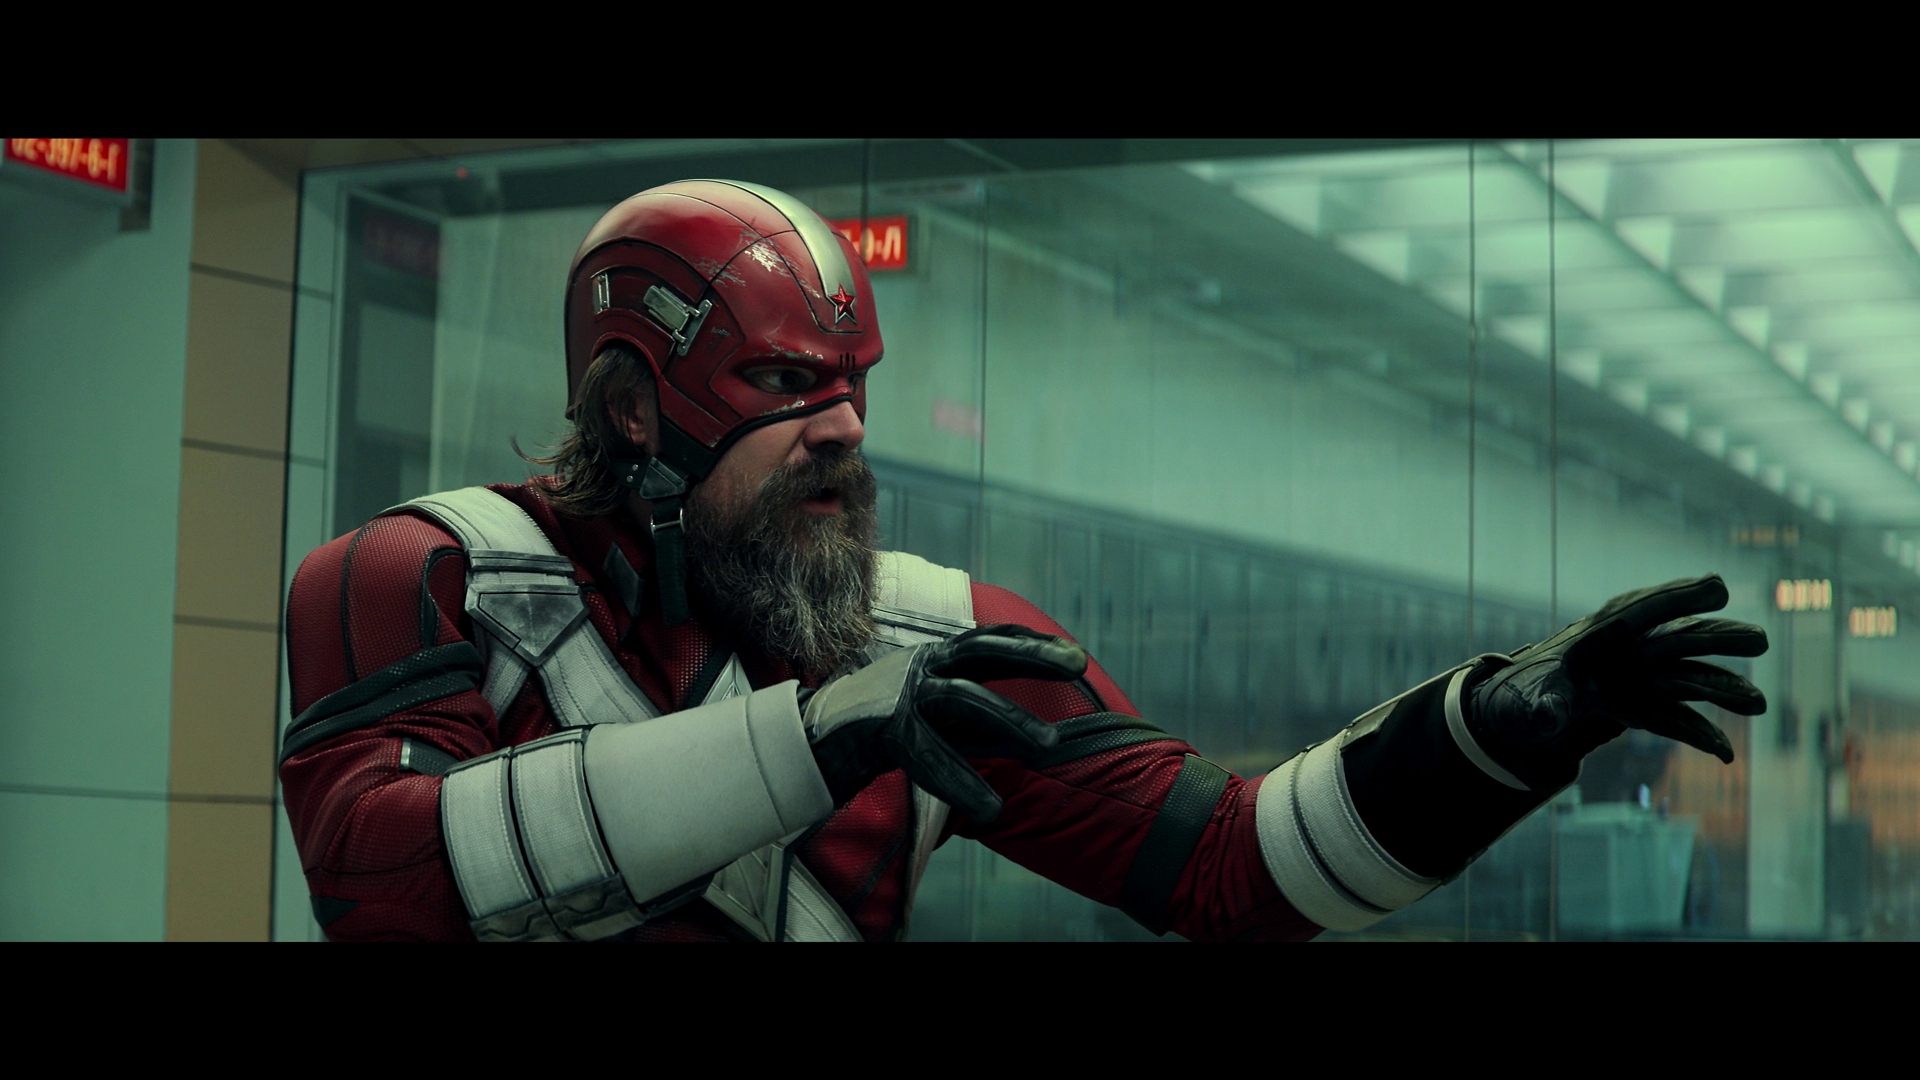 Red Guardian (David Harbour) suits up once more in Black Widow (2021), Marvel Entertainment